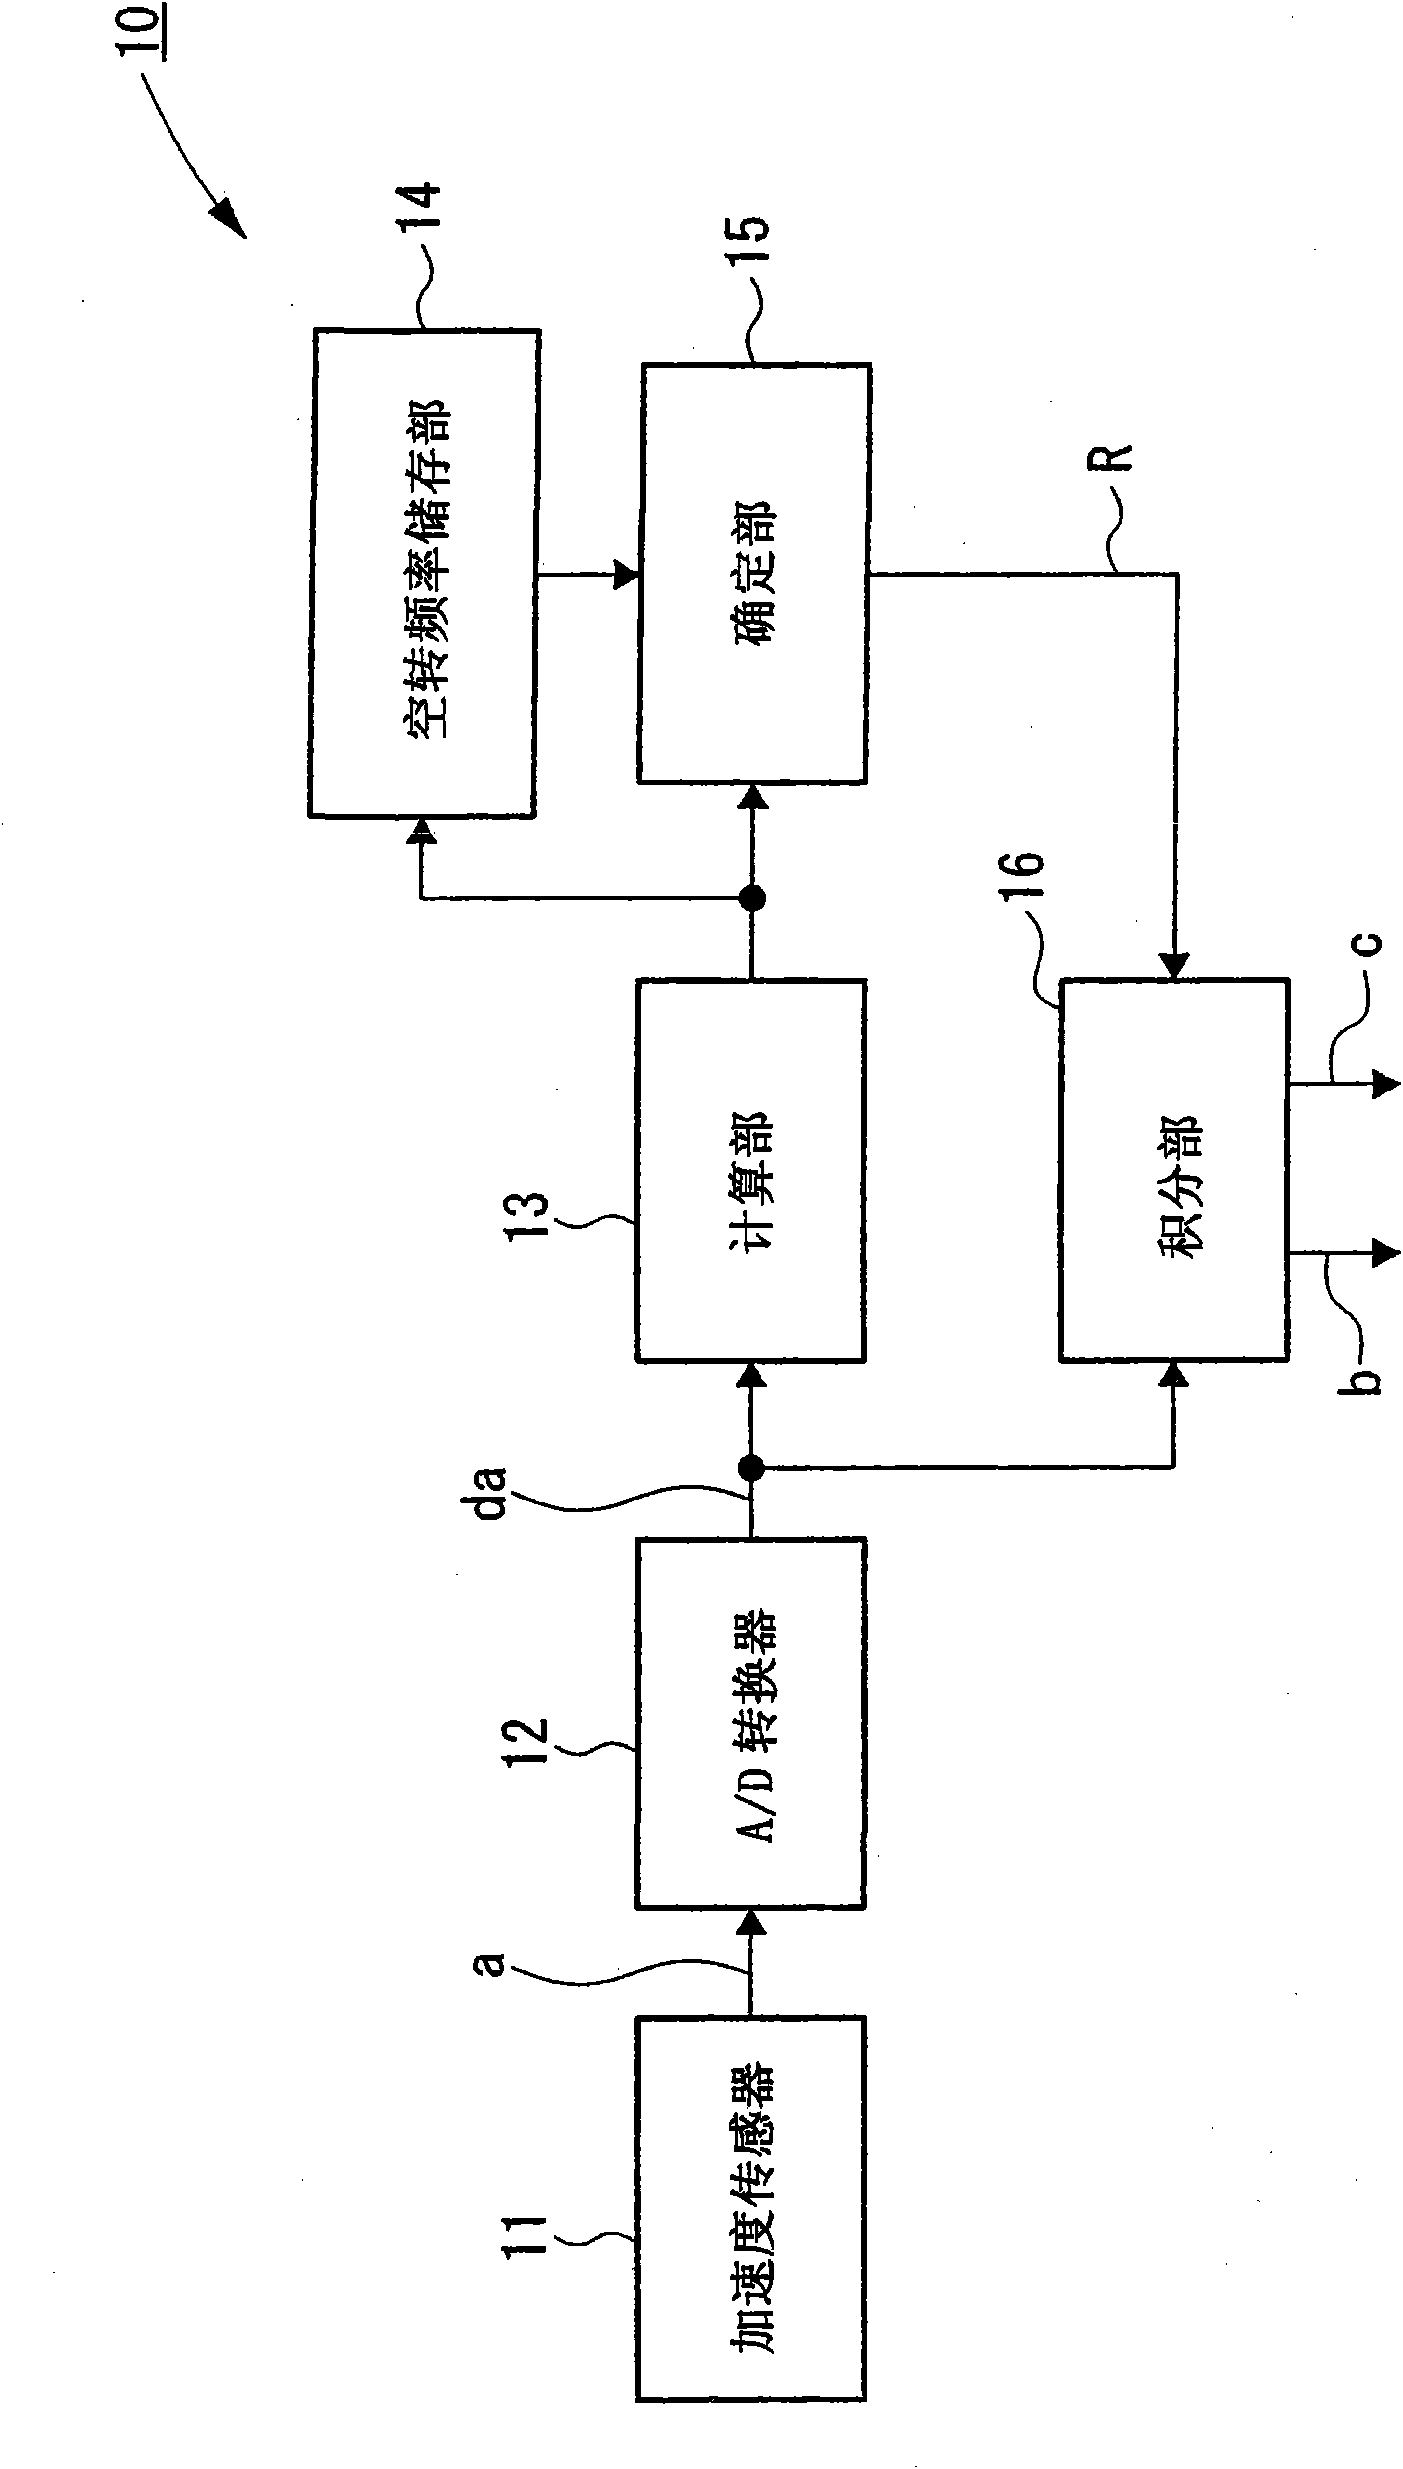 Distance measuring device for vehicles